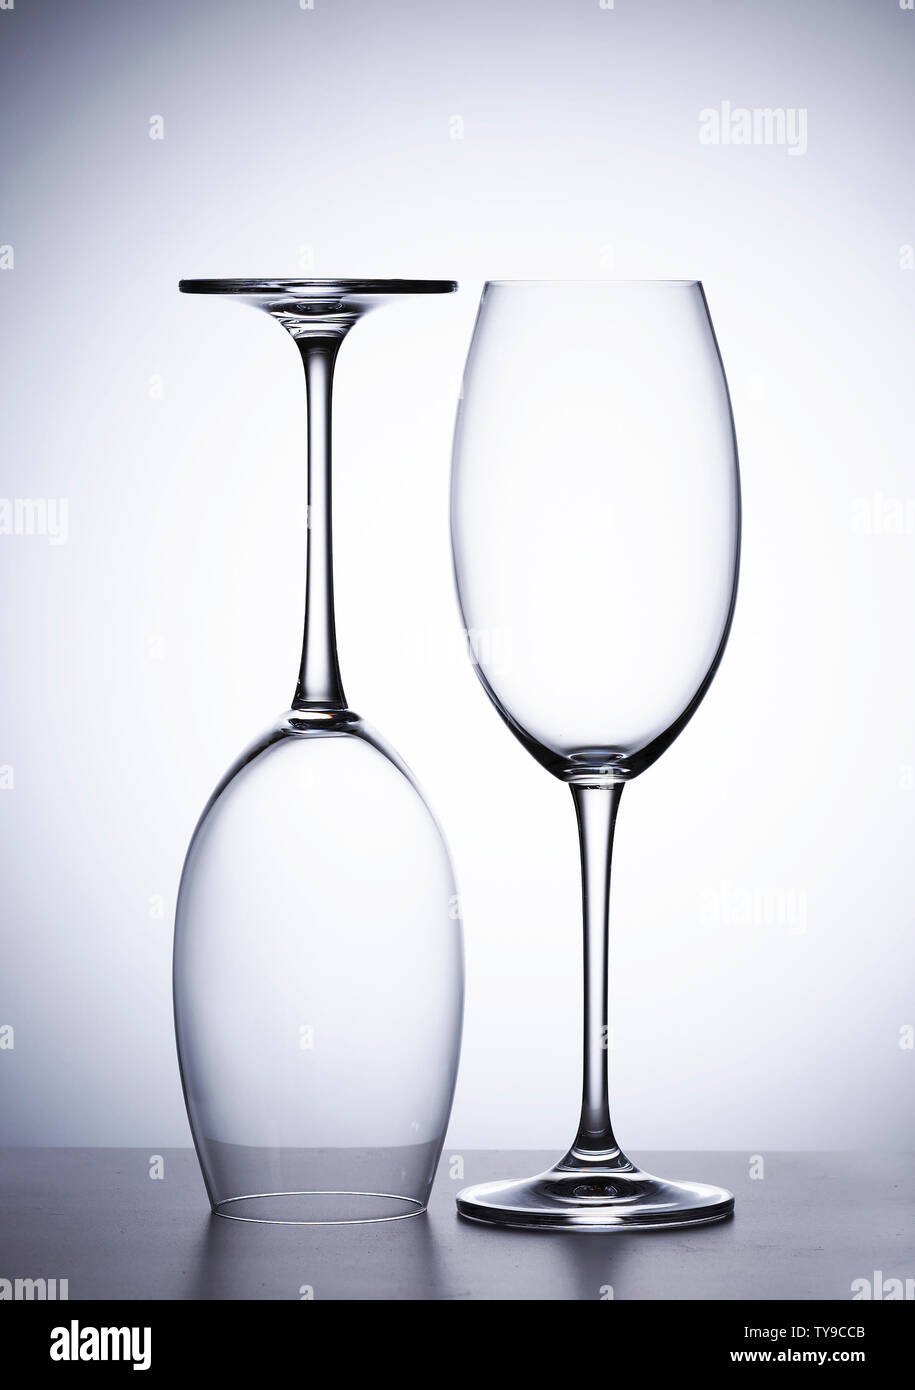 https://c8.alamy.com/comp/TY9CCB/empty-glass-of-red-wine-two-pieces-ones-upside-down-TY9CCB.jpg